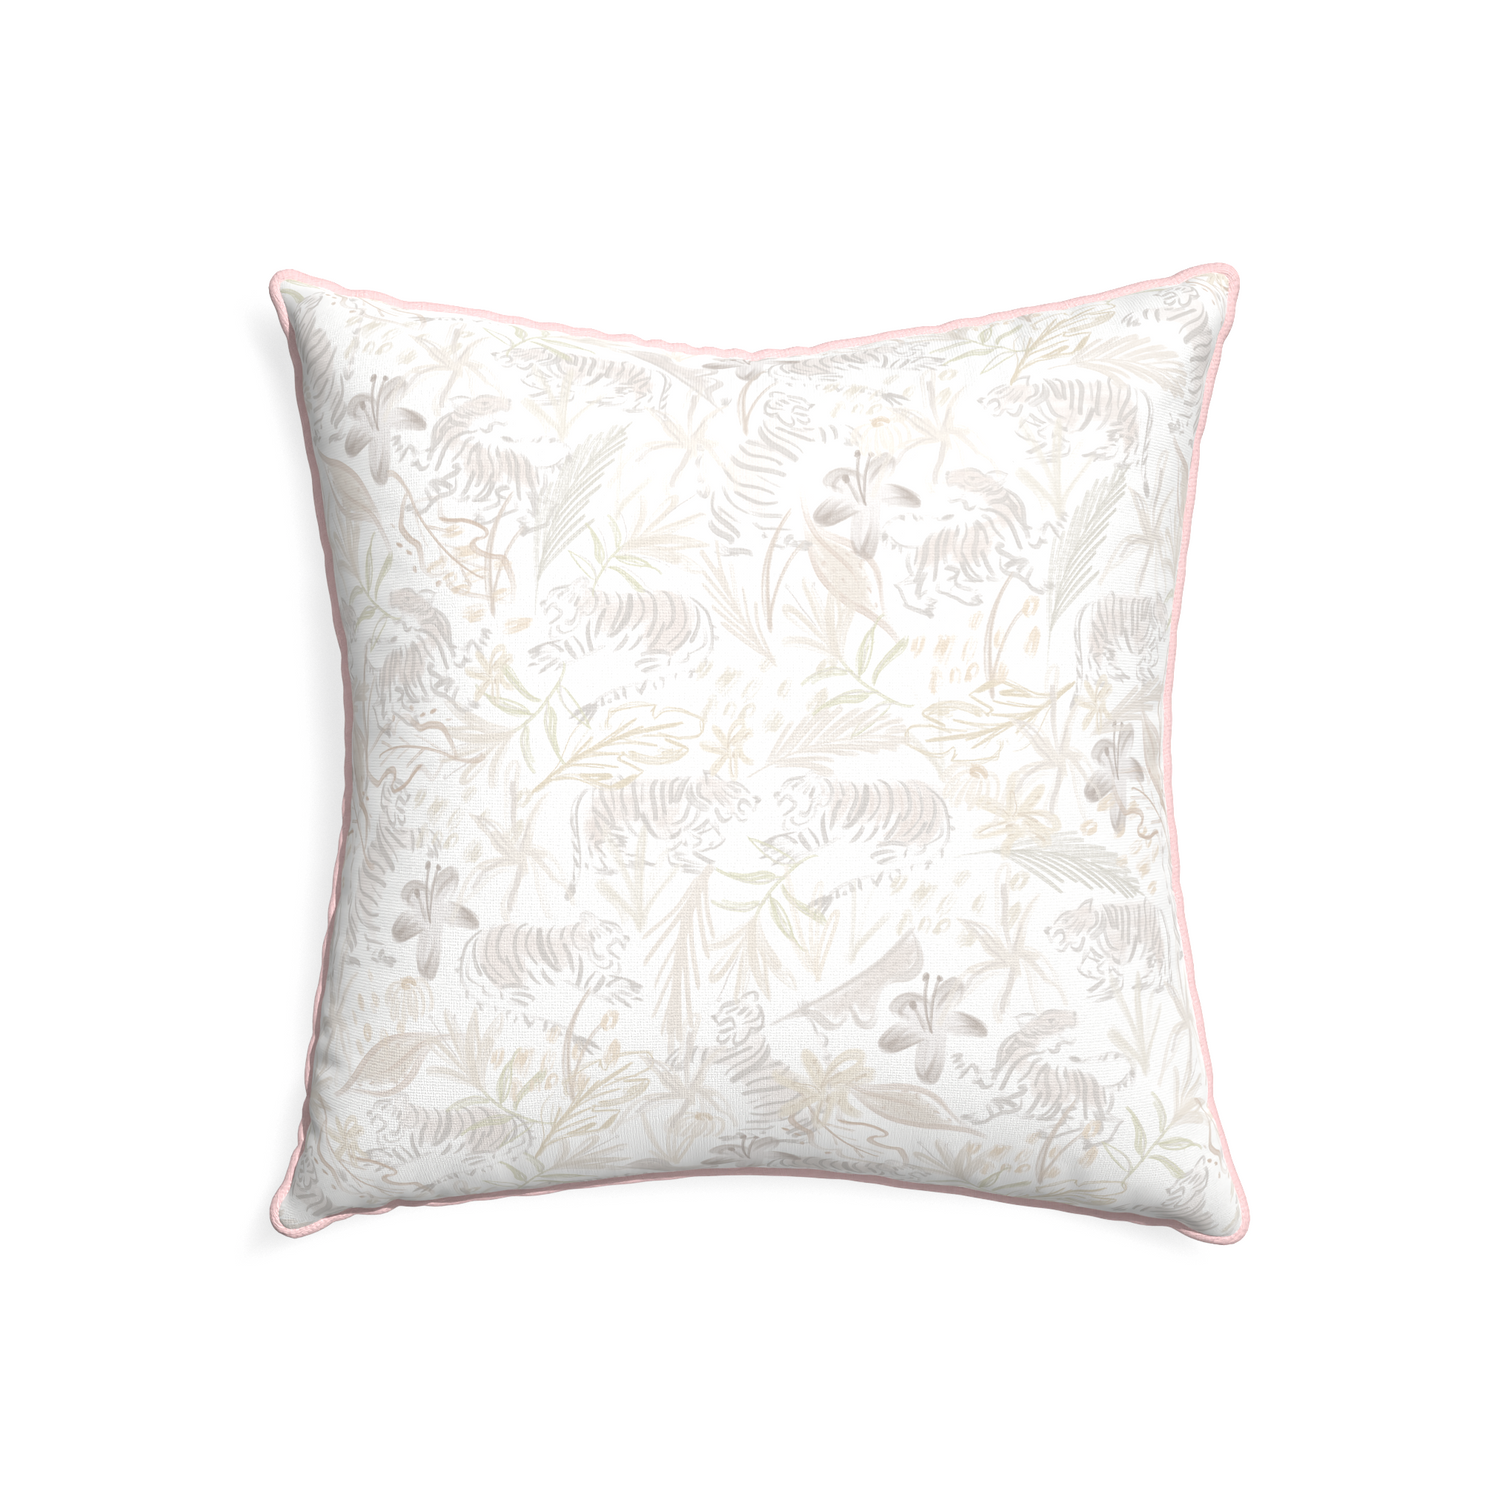 22-square frida sand custom beige chinoiserie tigerpillow with petal piping on white background